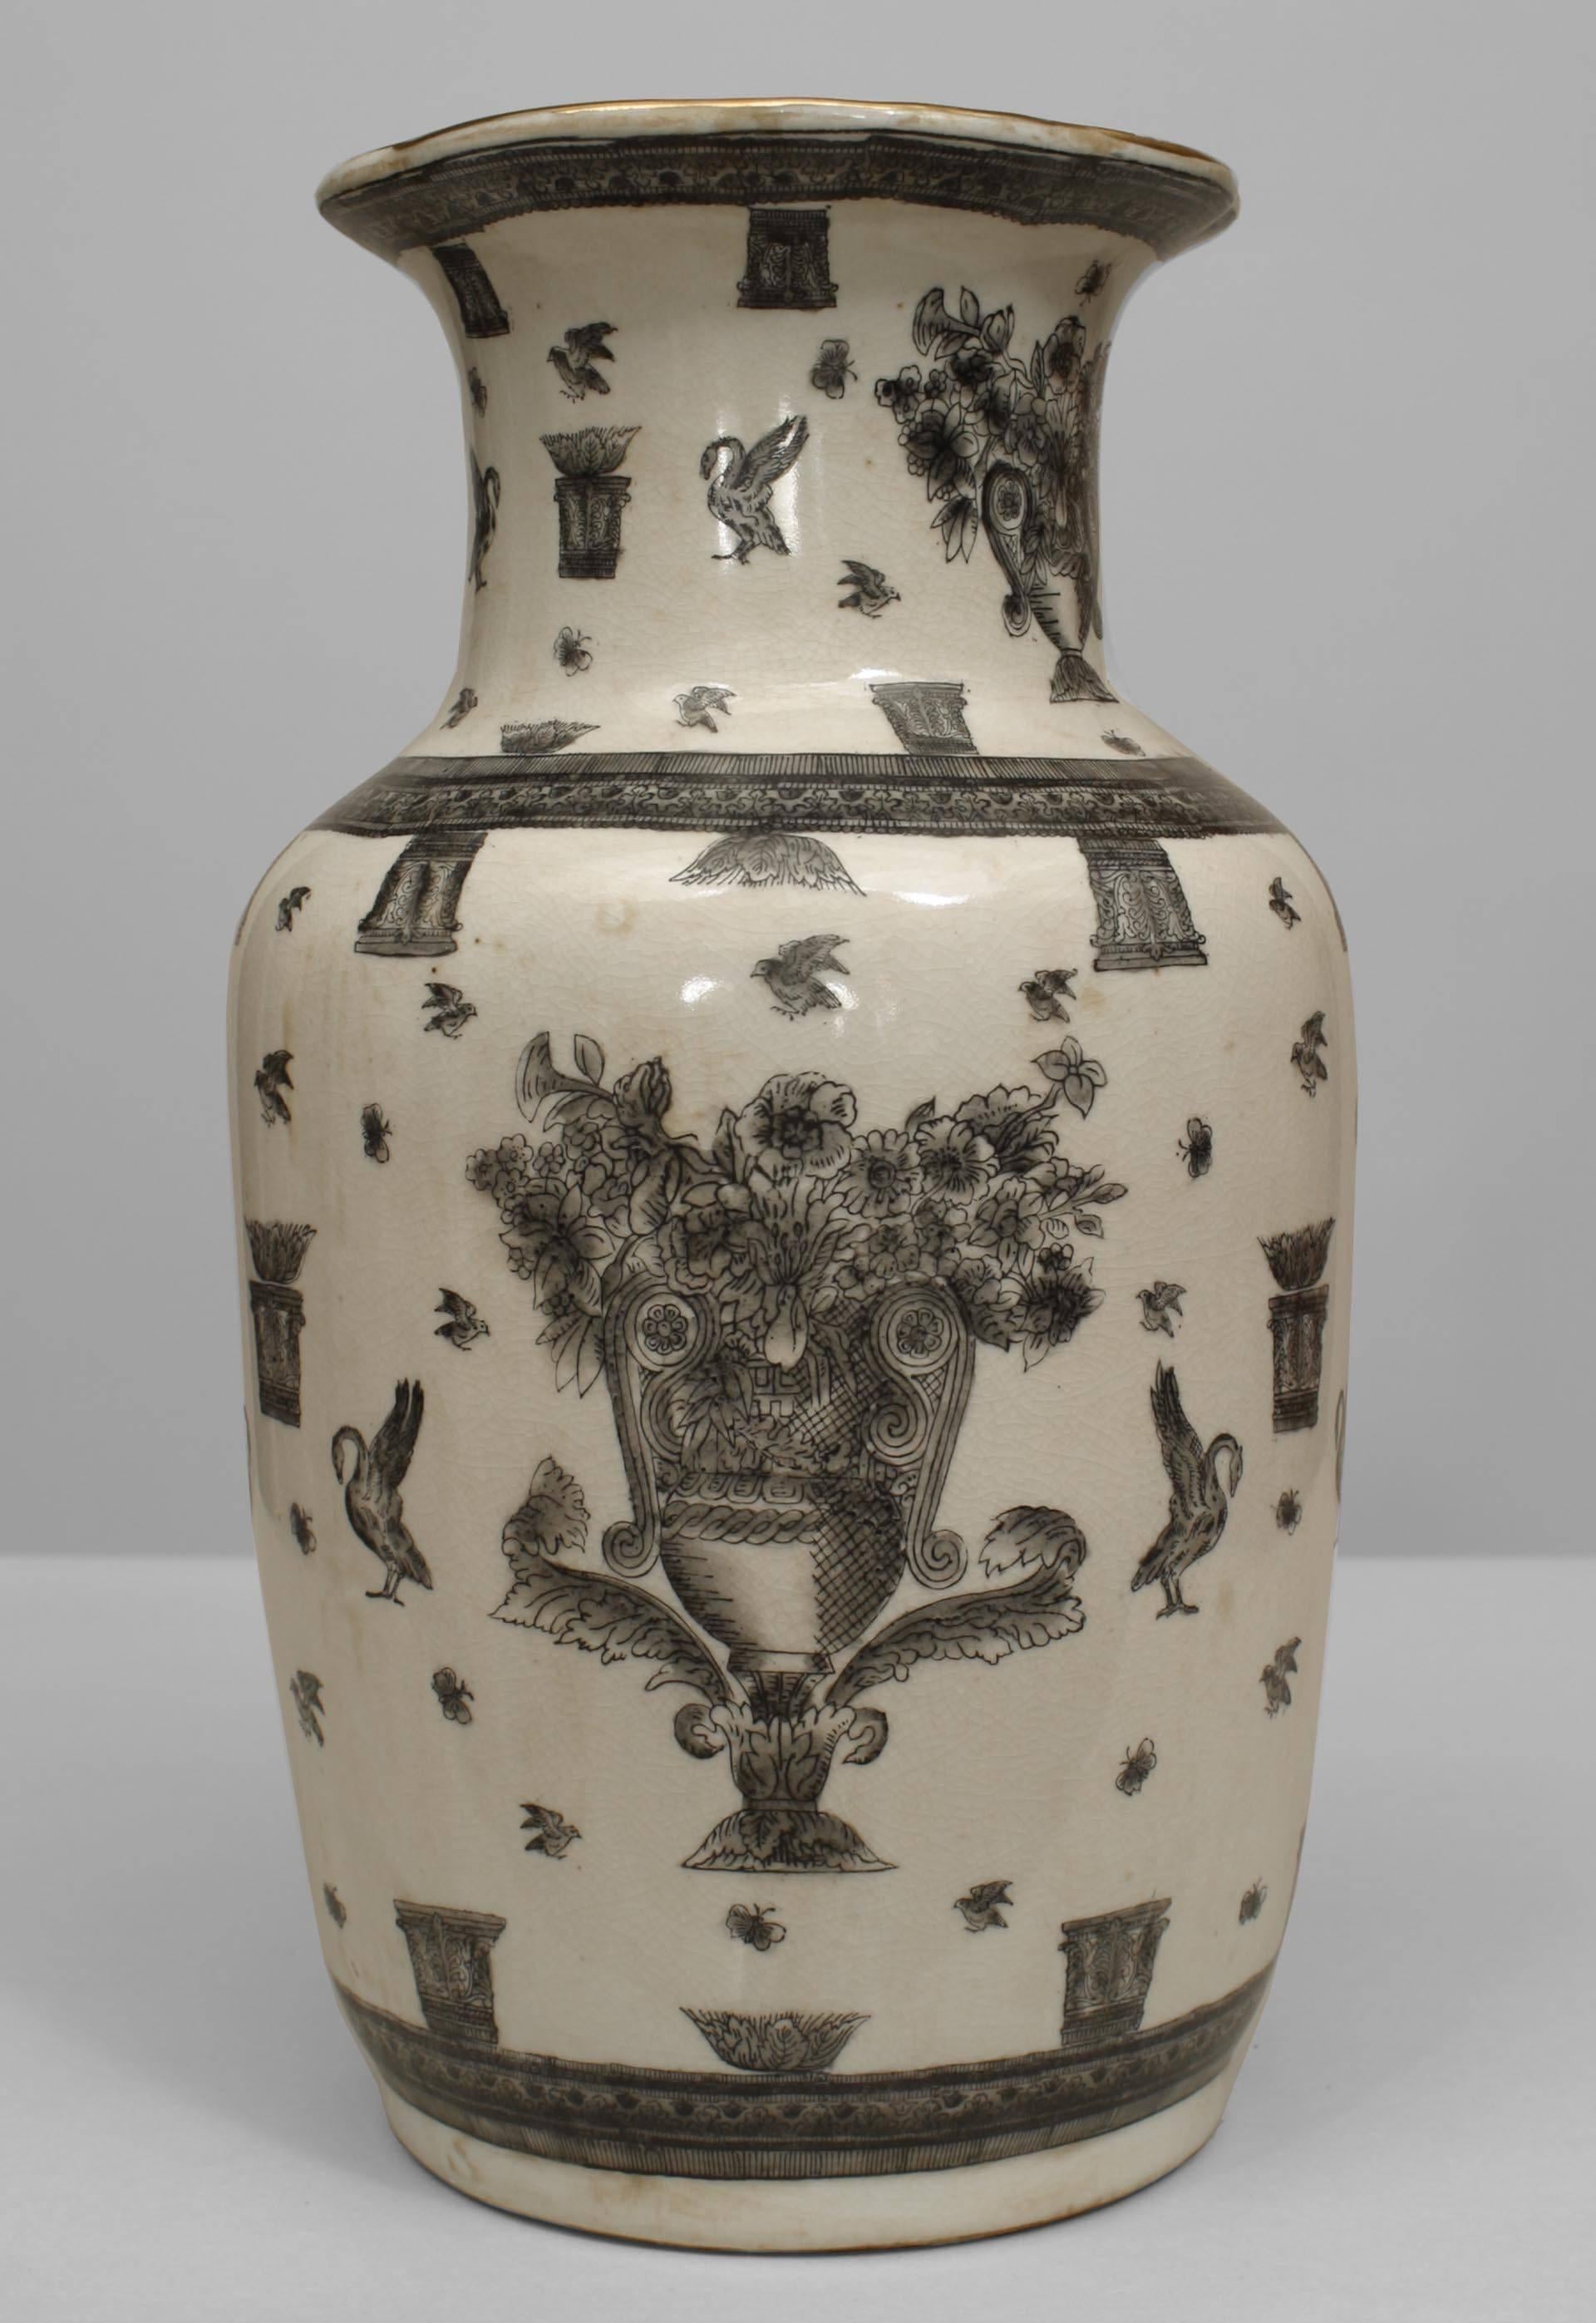 Pair of Asian Chinese style (19th Cent) white and black decorated vases with large urns filled with flowers along with birds and butterflies. RePairs (PRICED AS Pair)
